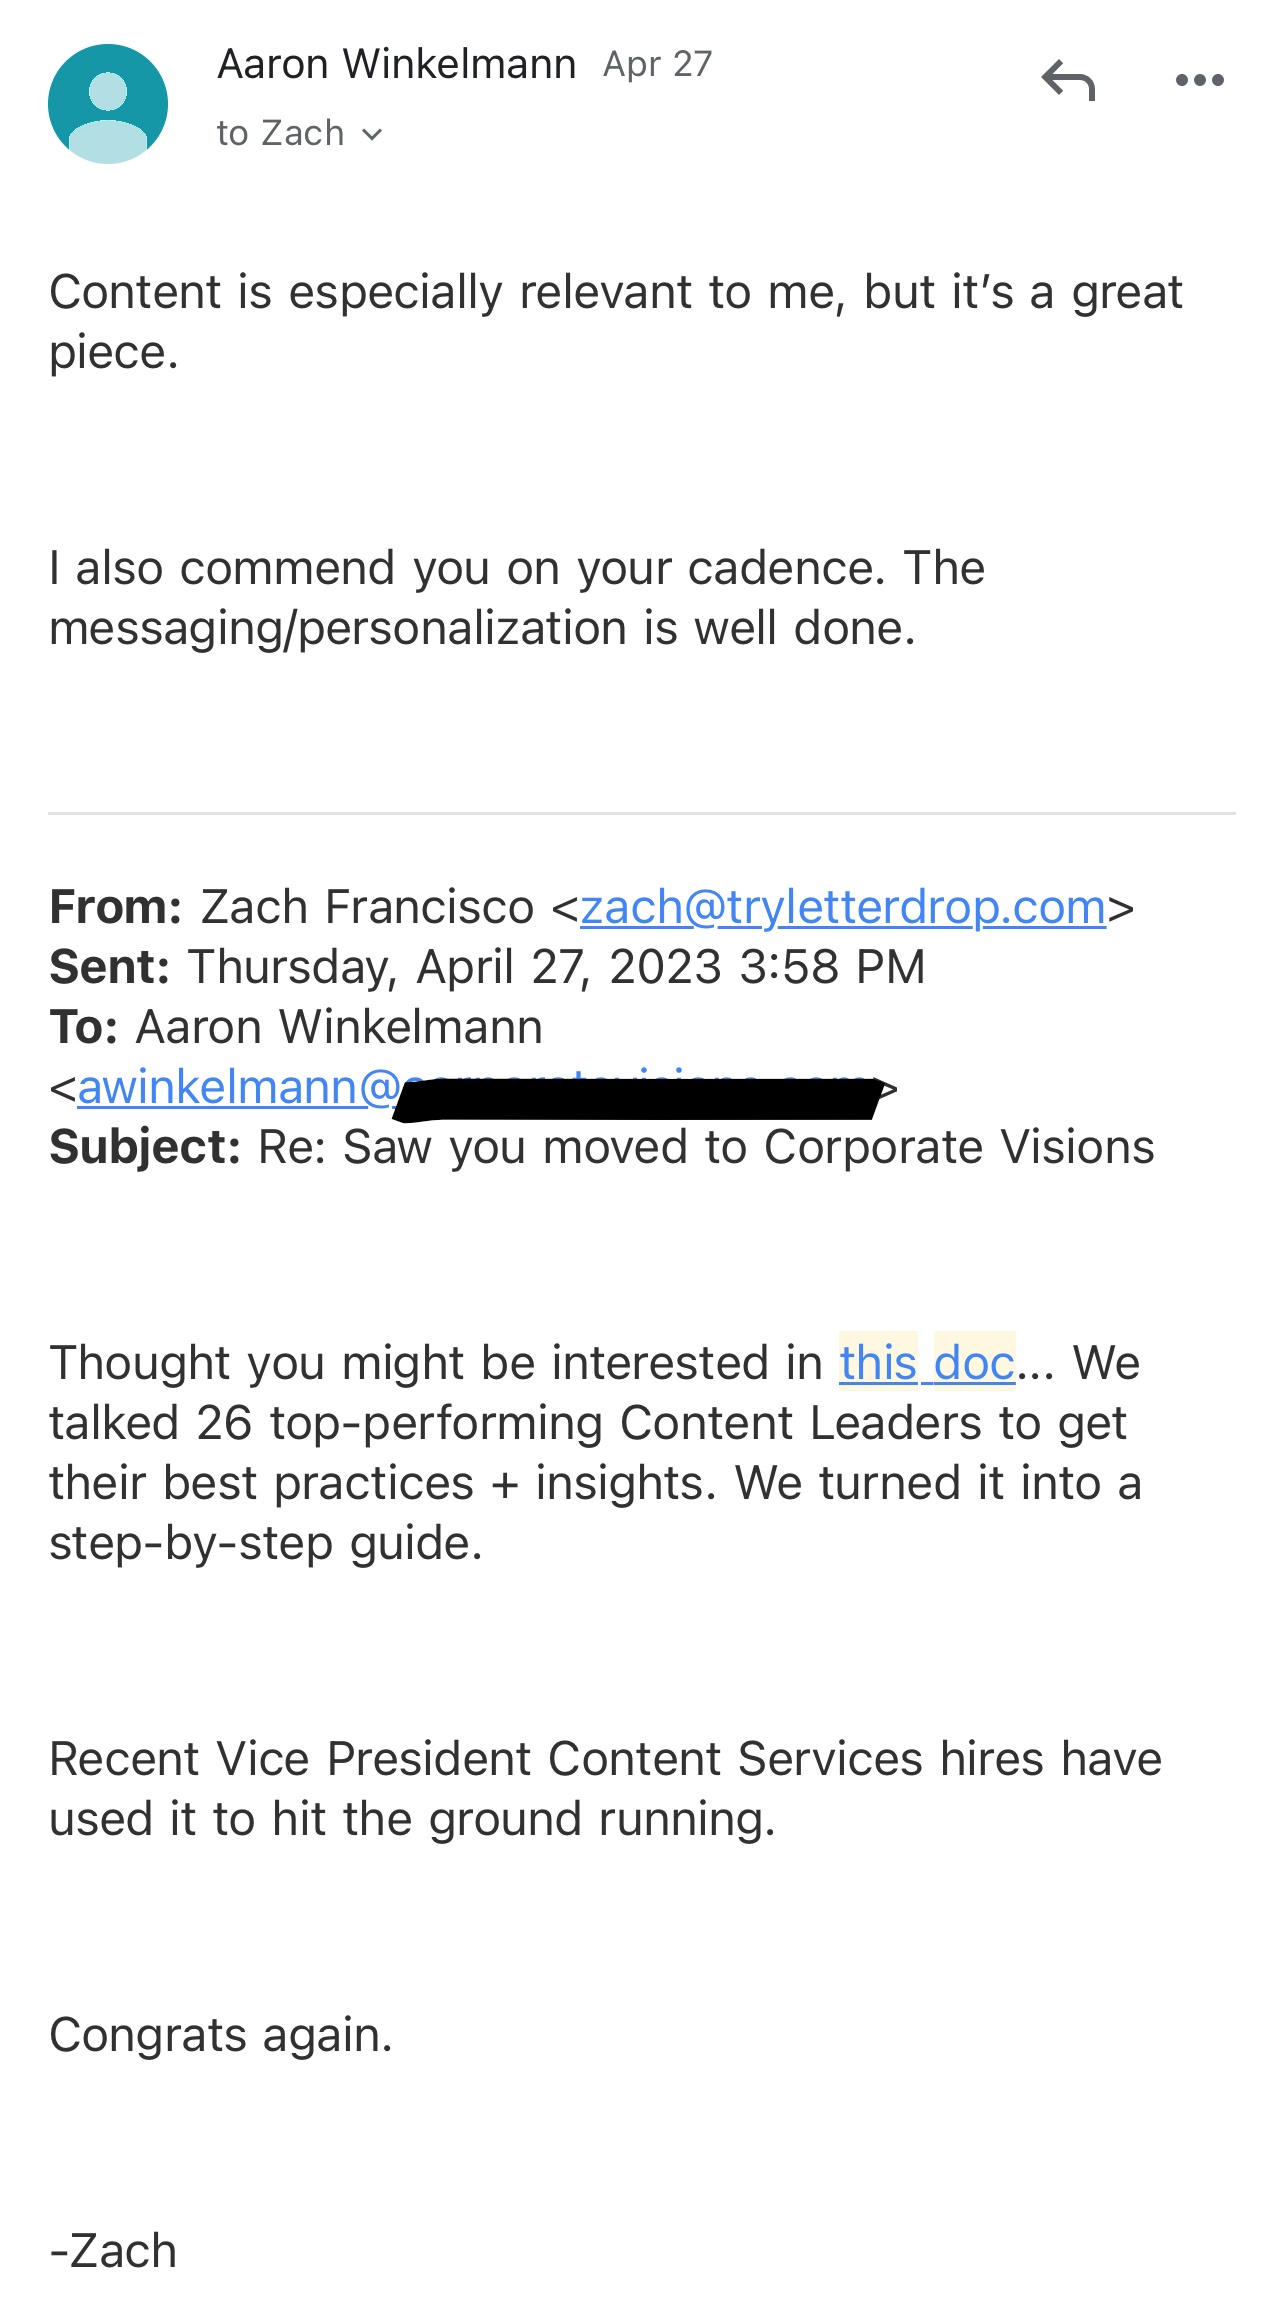 Aaron from Corporate Visions thank us for our content in a prospecting email